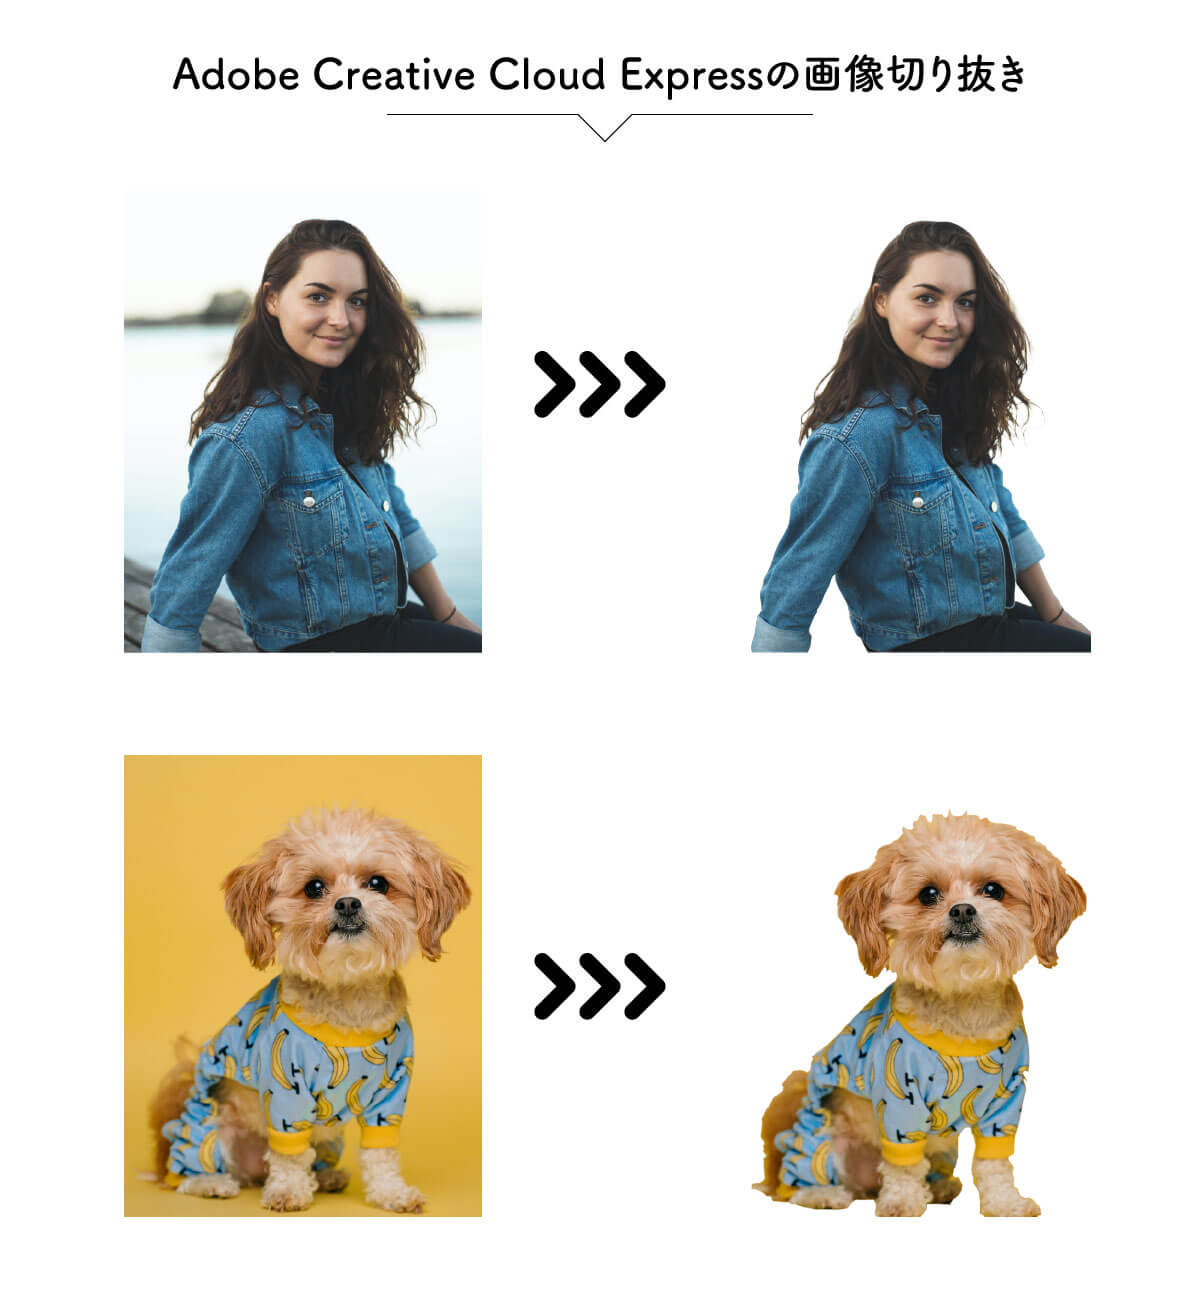 Adobe Creative Cloud Expressで画像を切り抜いた例